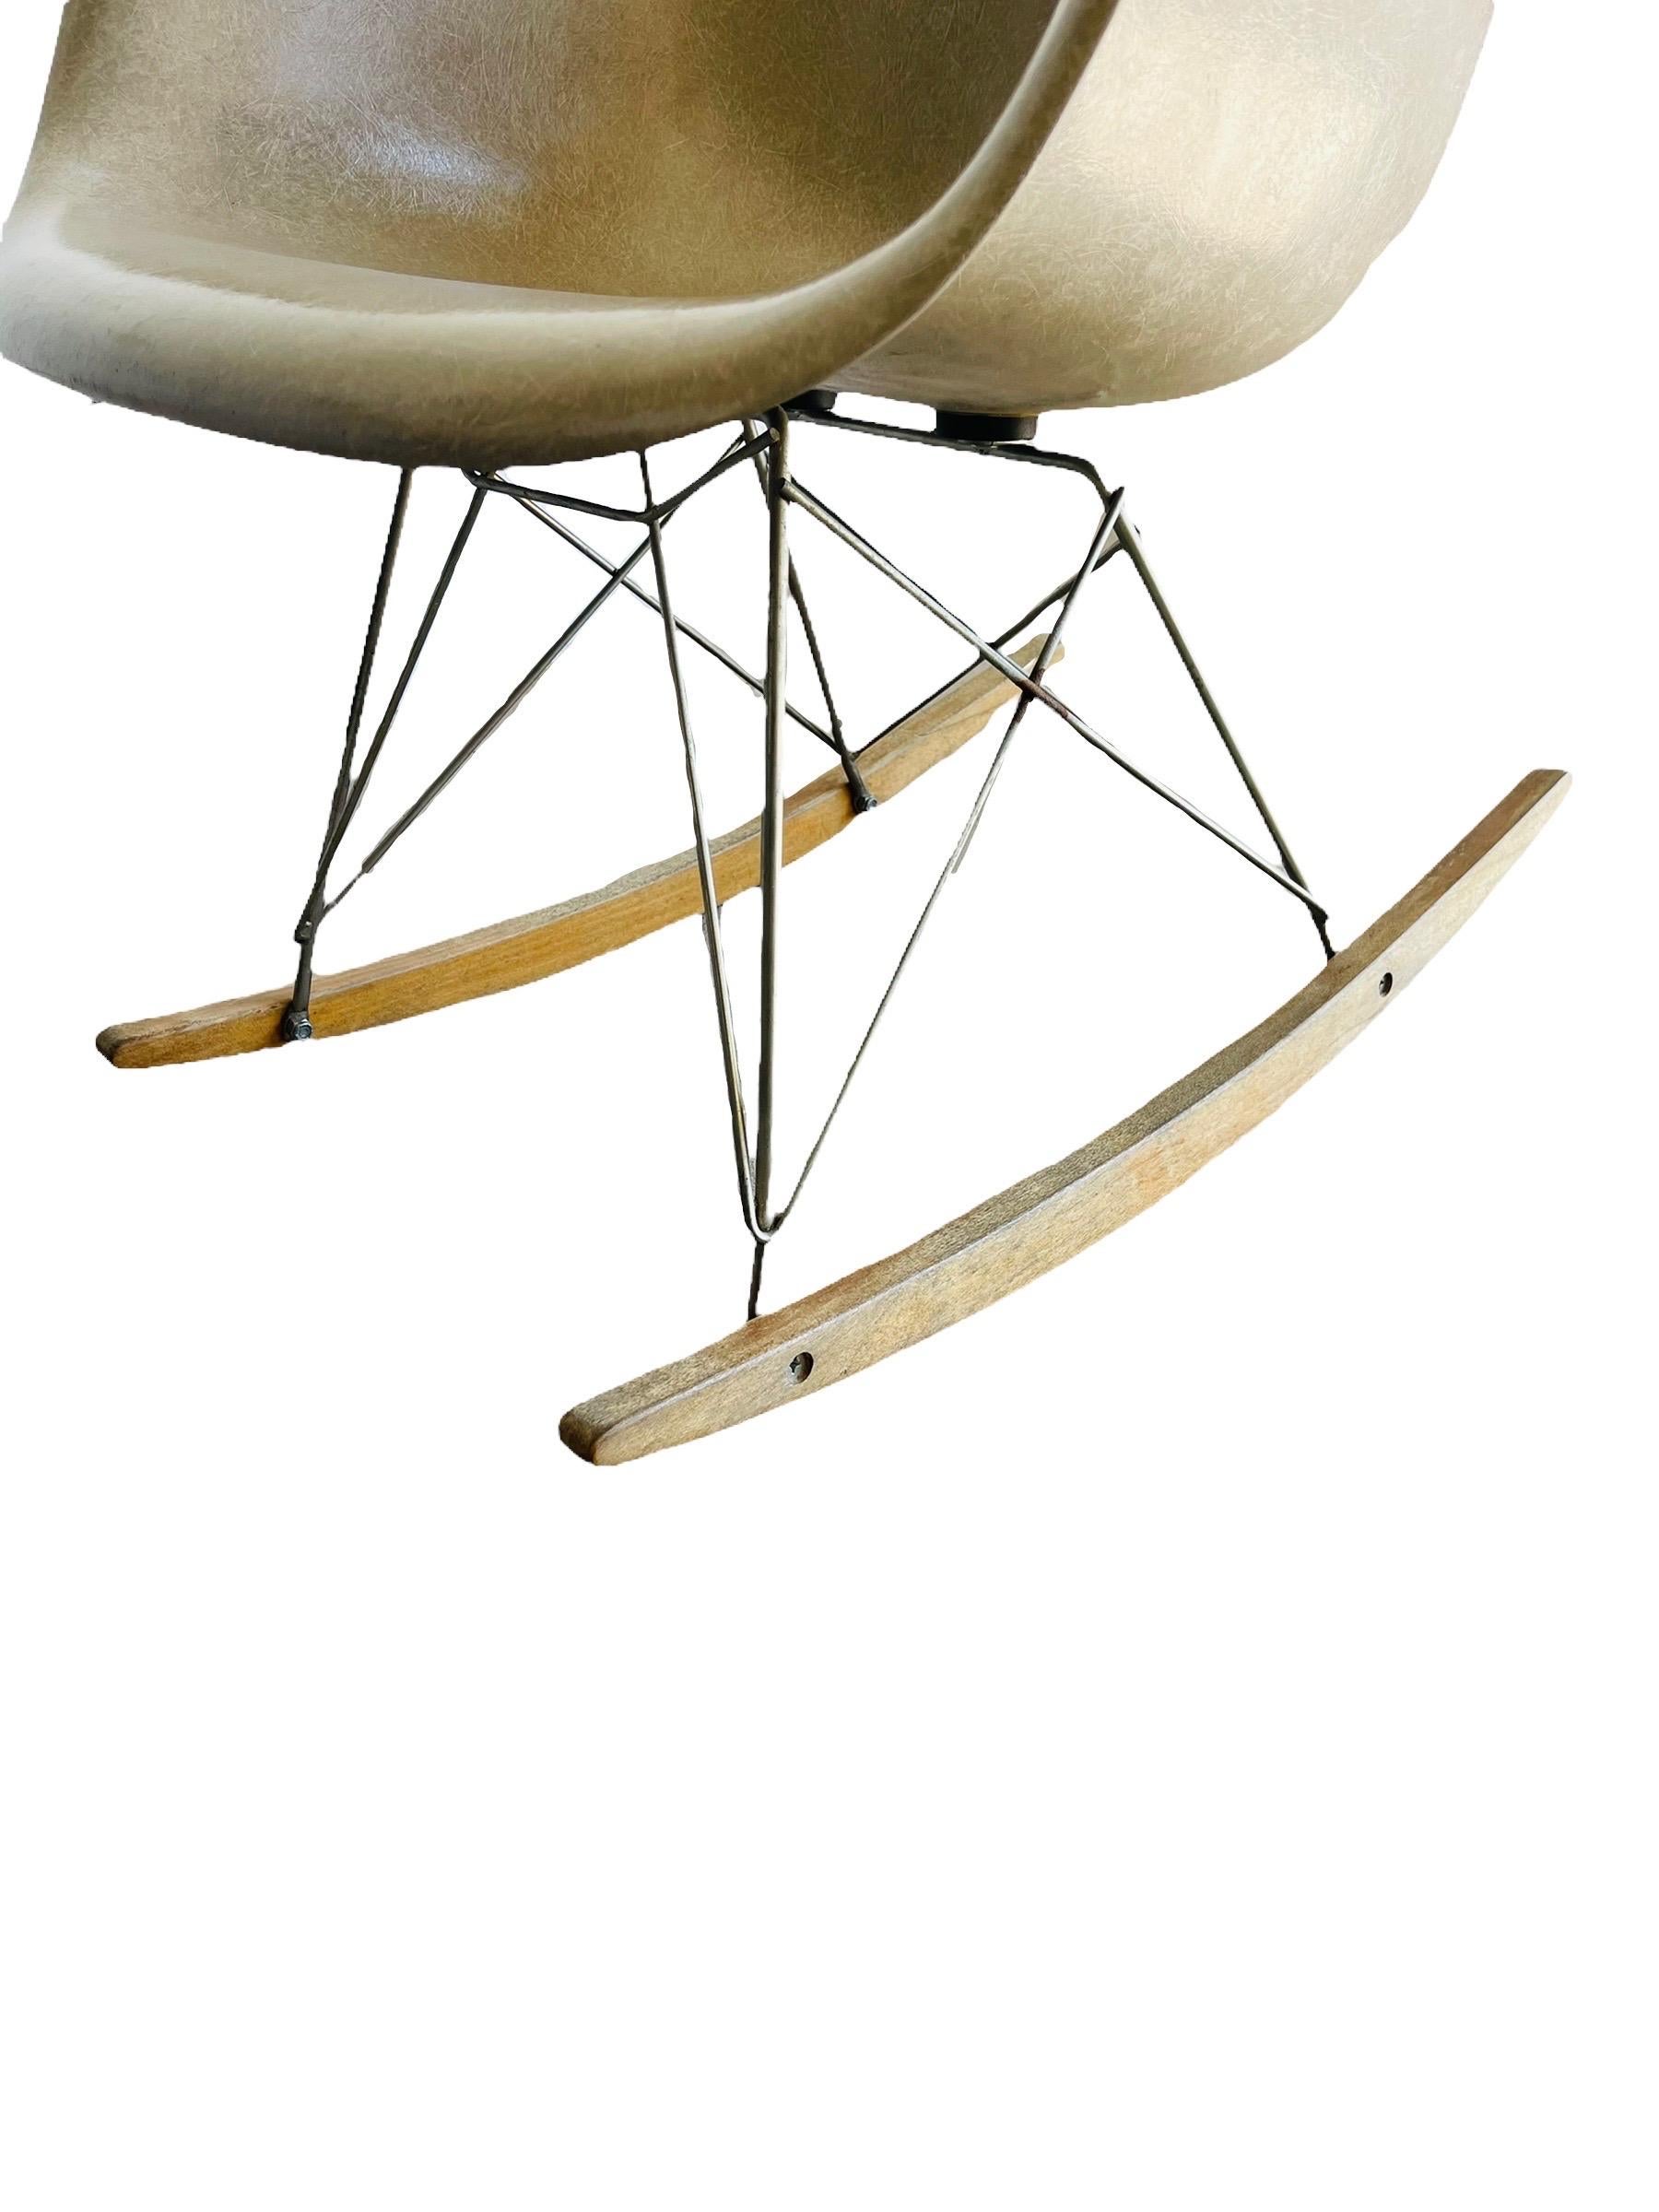 Authentic RAR Rocking Chair by Charles & Ray Eames for Herman Miller, 1960s For Sale 1